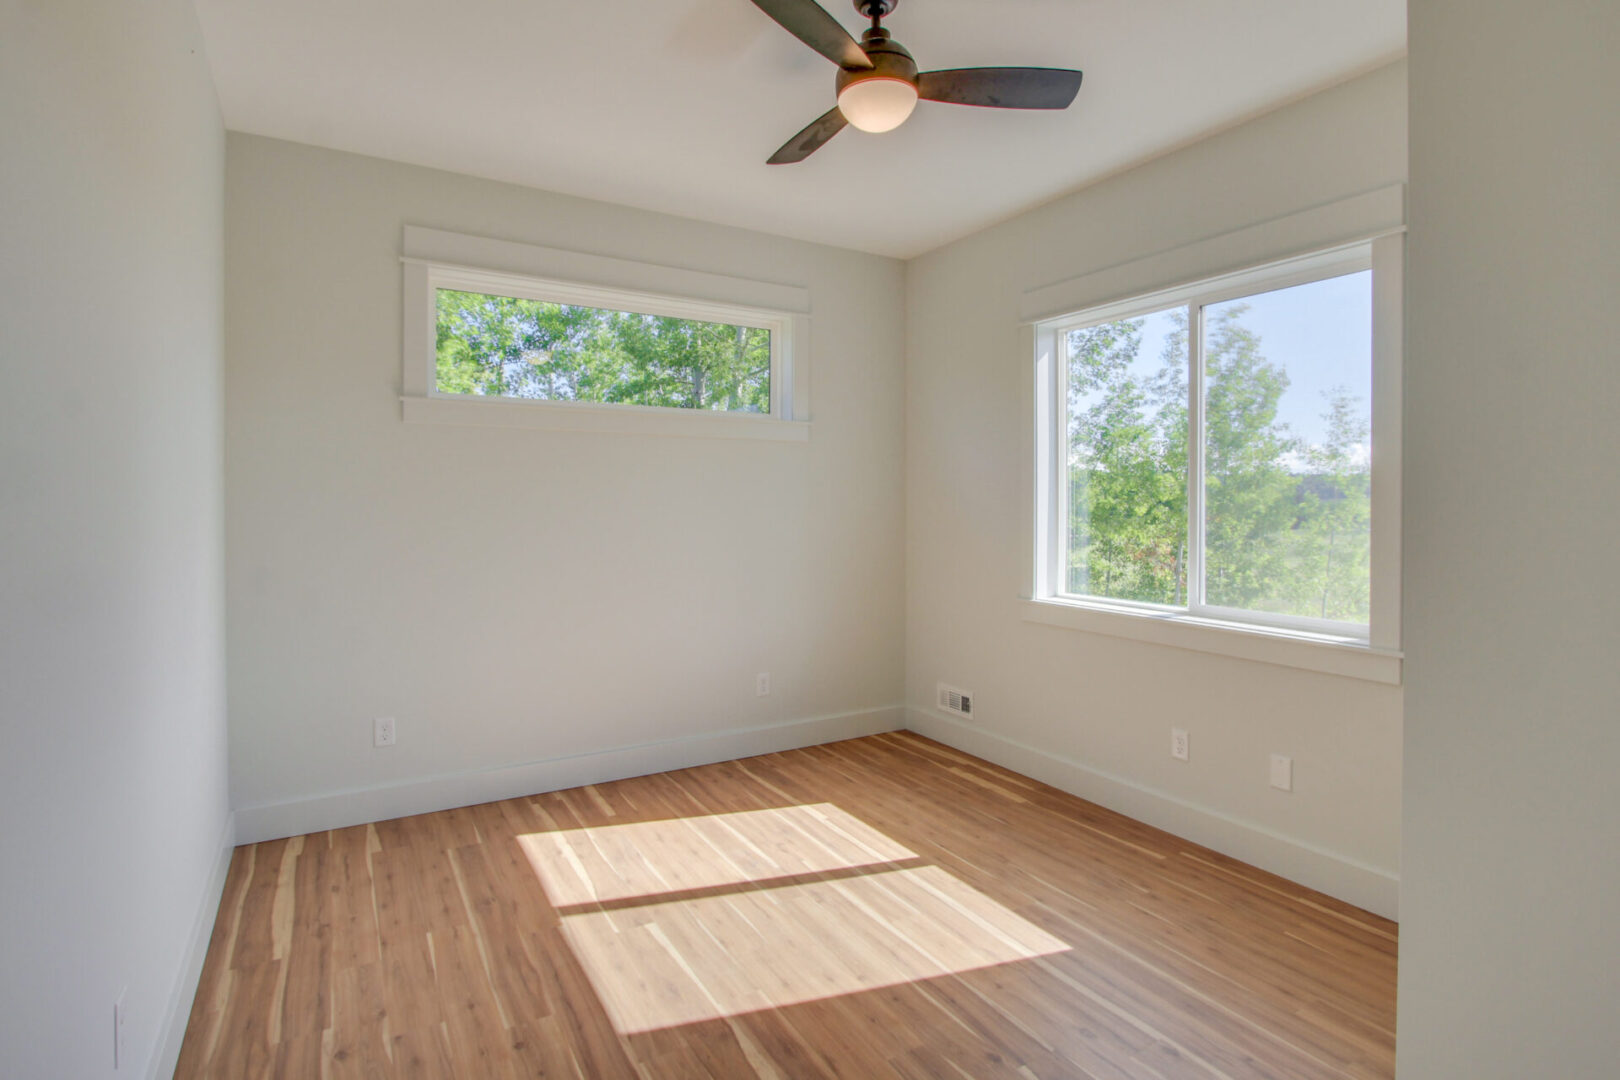 A small, empty room with white walls and a large window